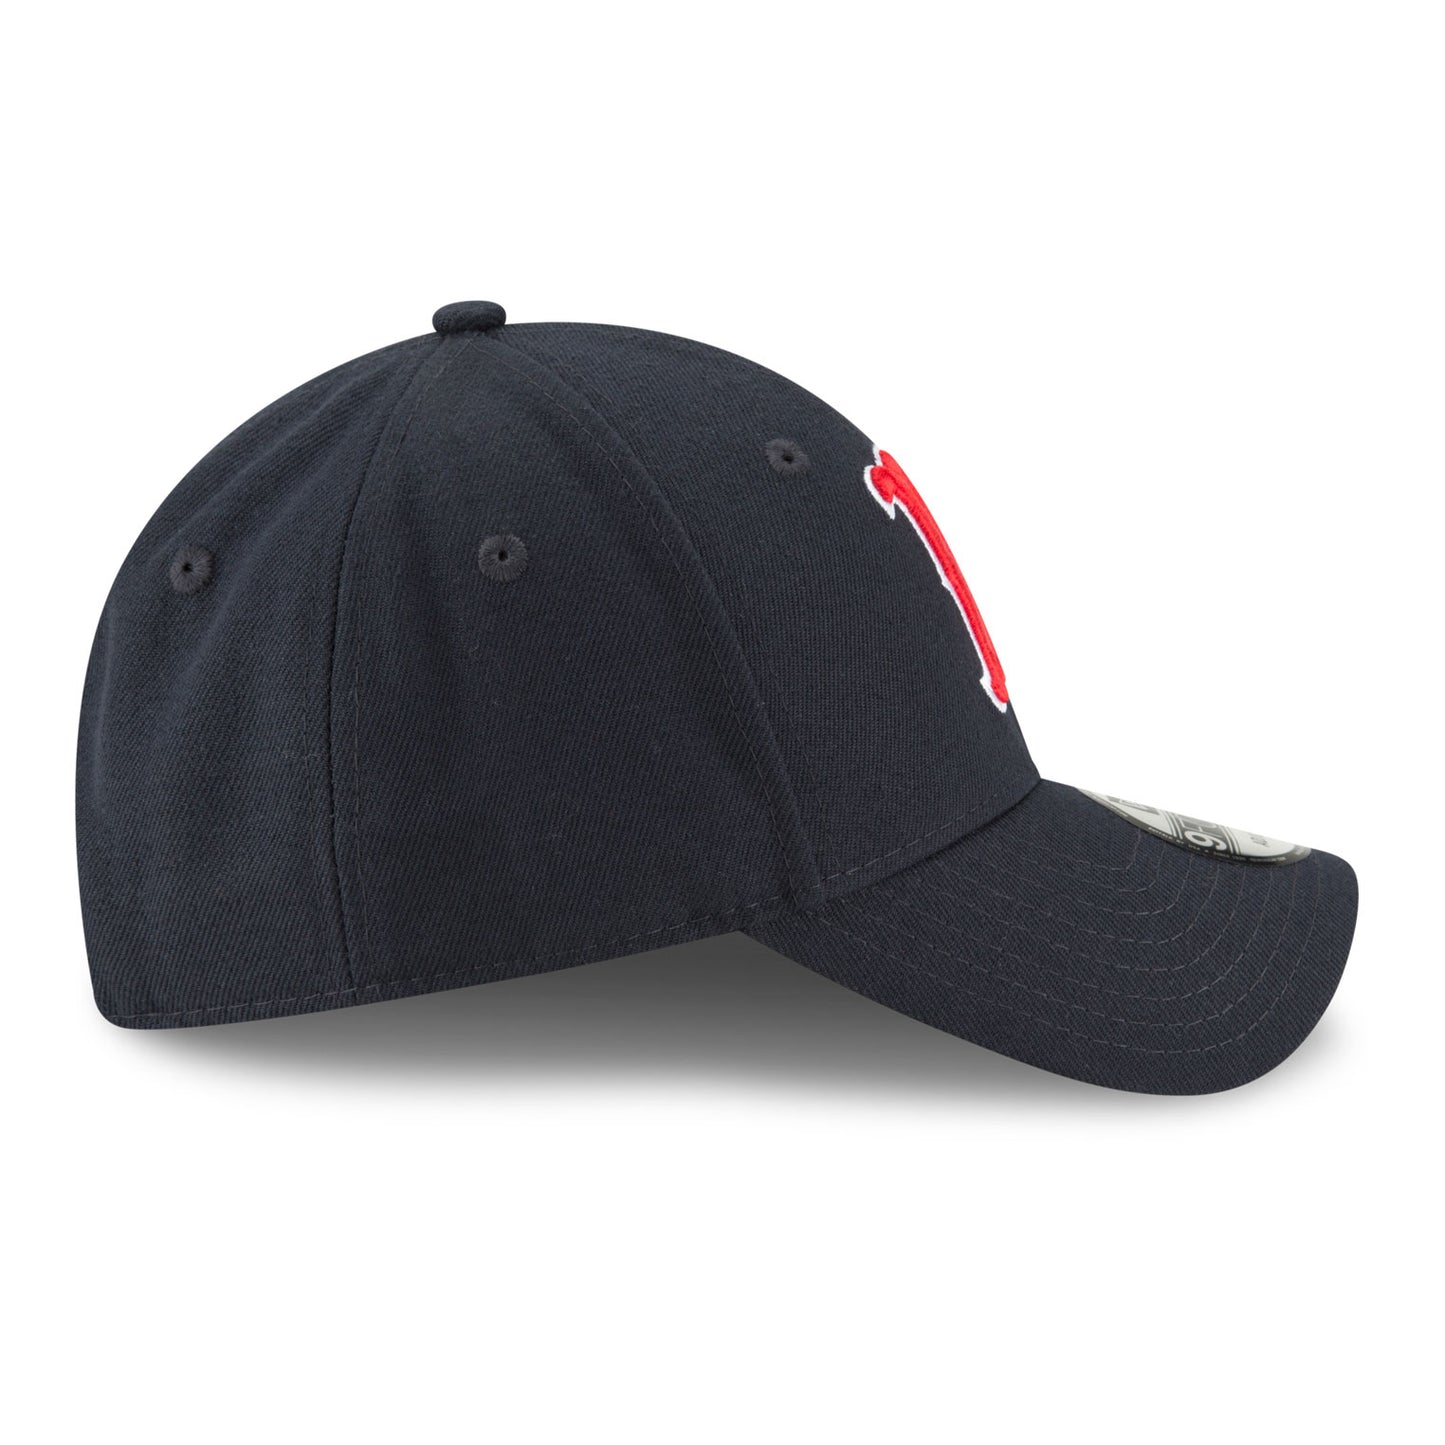 THE LEAGUE Boston Red Sox 9FORTY New Era Cap